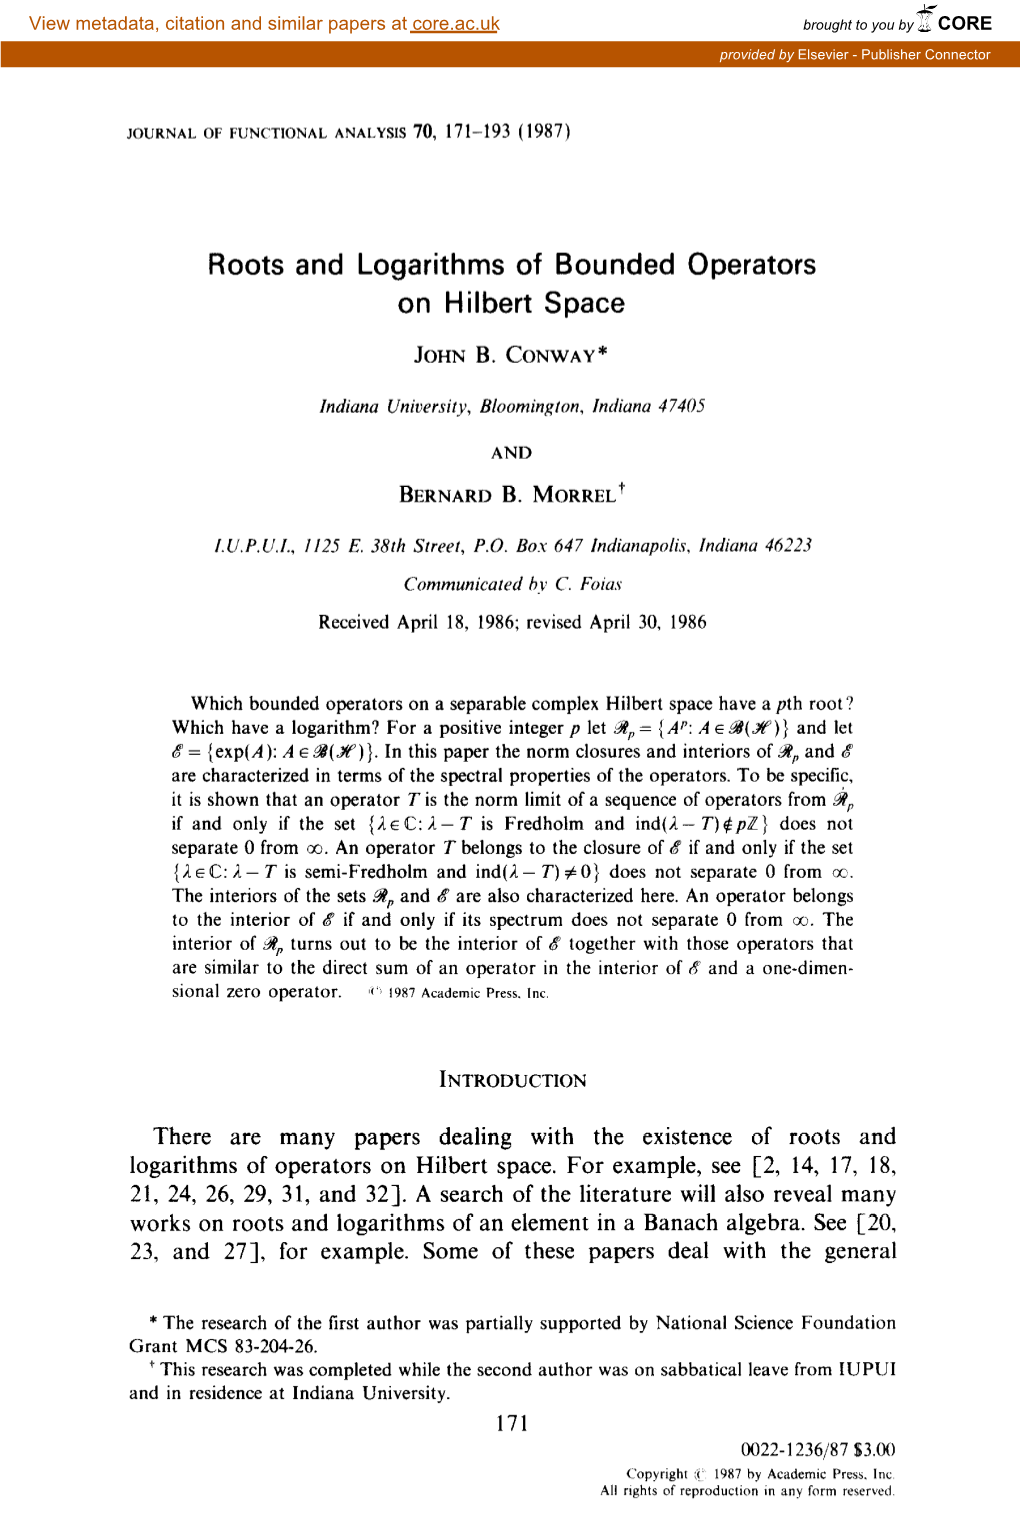 Roots and Logarithms of Bounded Operators on Hilbert Space